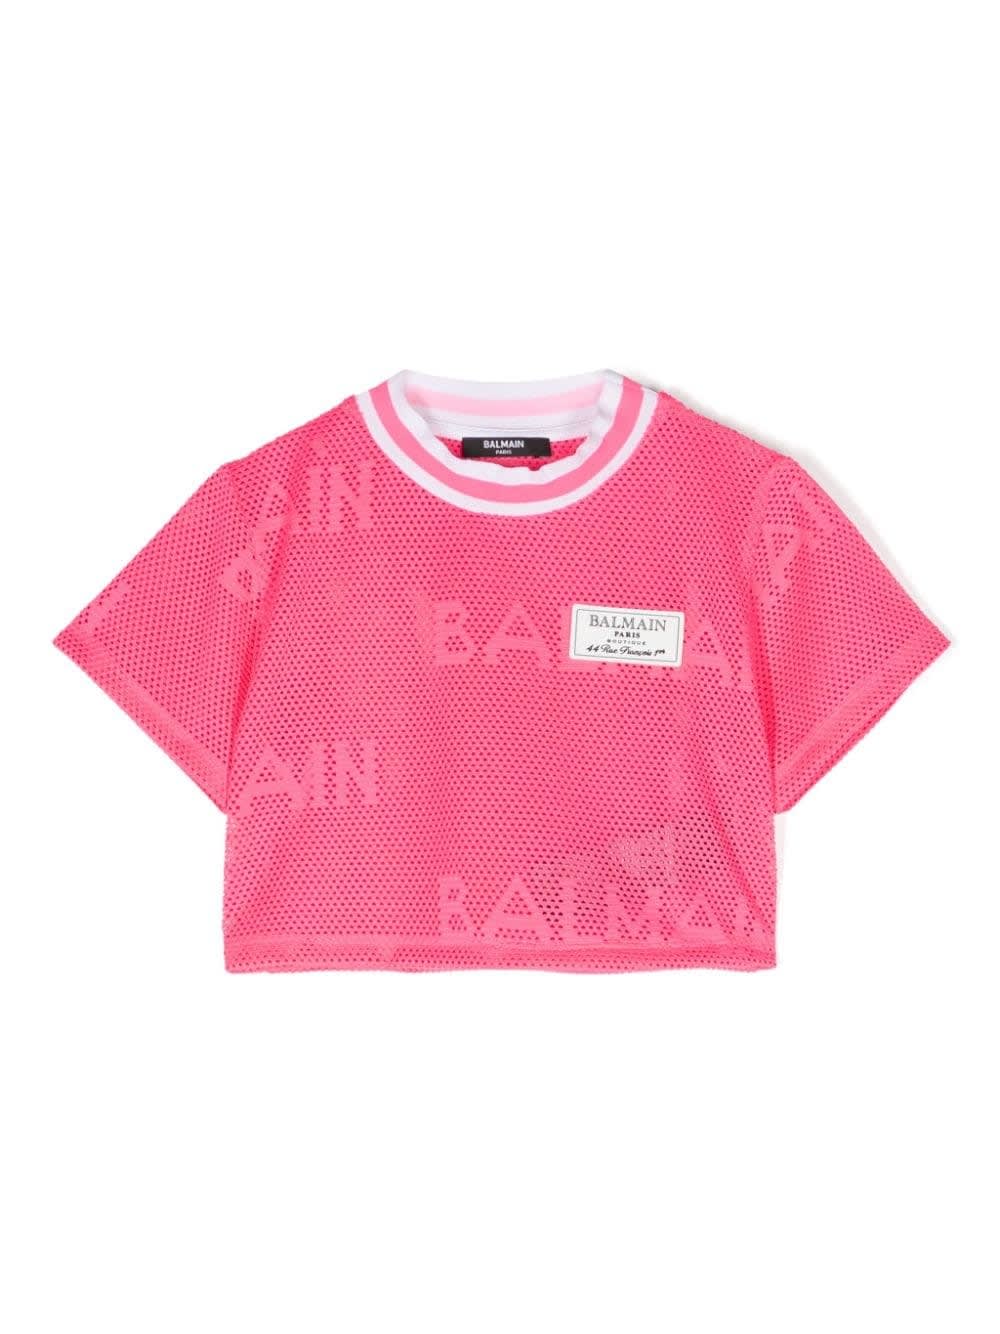 Balmain Kids' T-shirt With Application In Pink